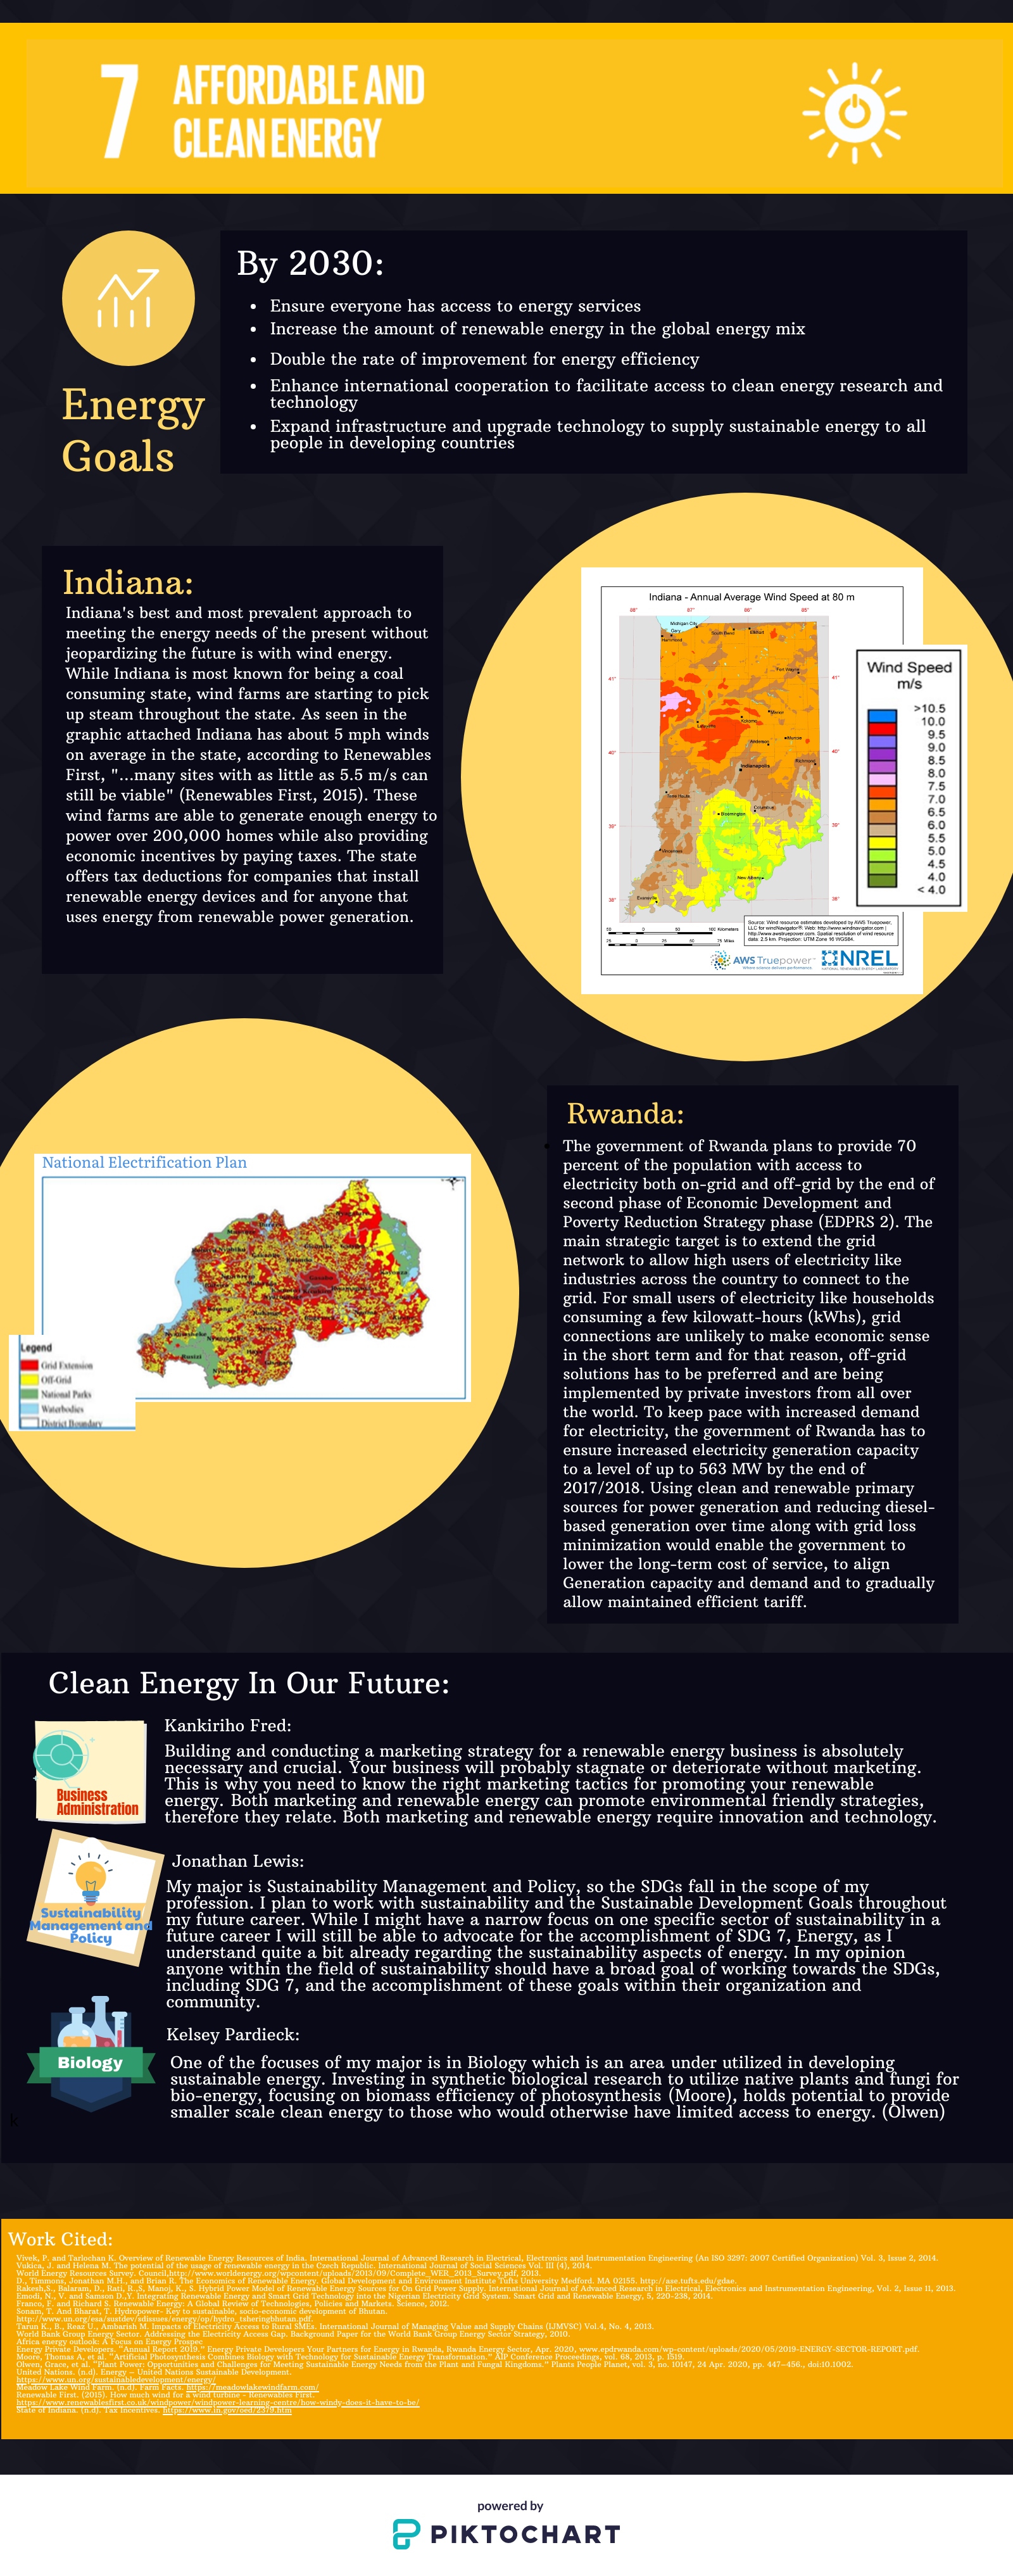 Poster comparing Affordable and Clean Energy in Rwanda and the United States